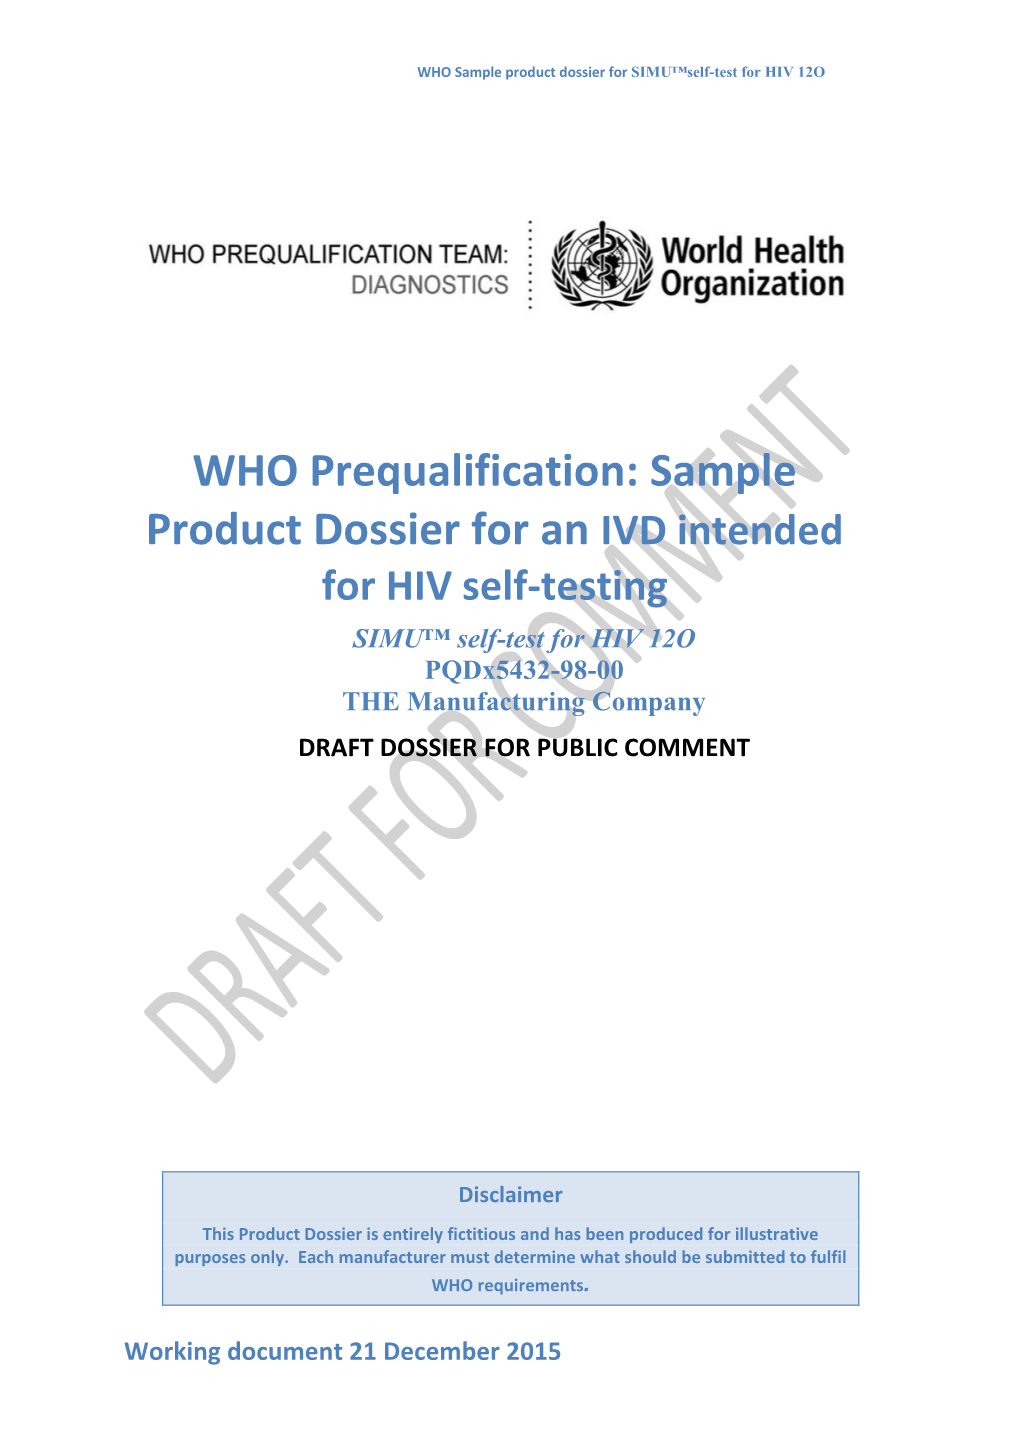 WHO Prequalification: Sample Product Dossier for an IVD Intended